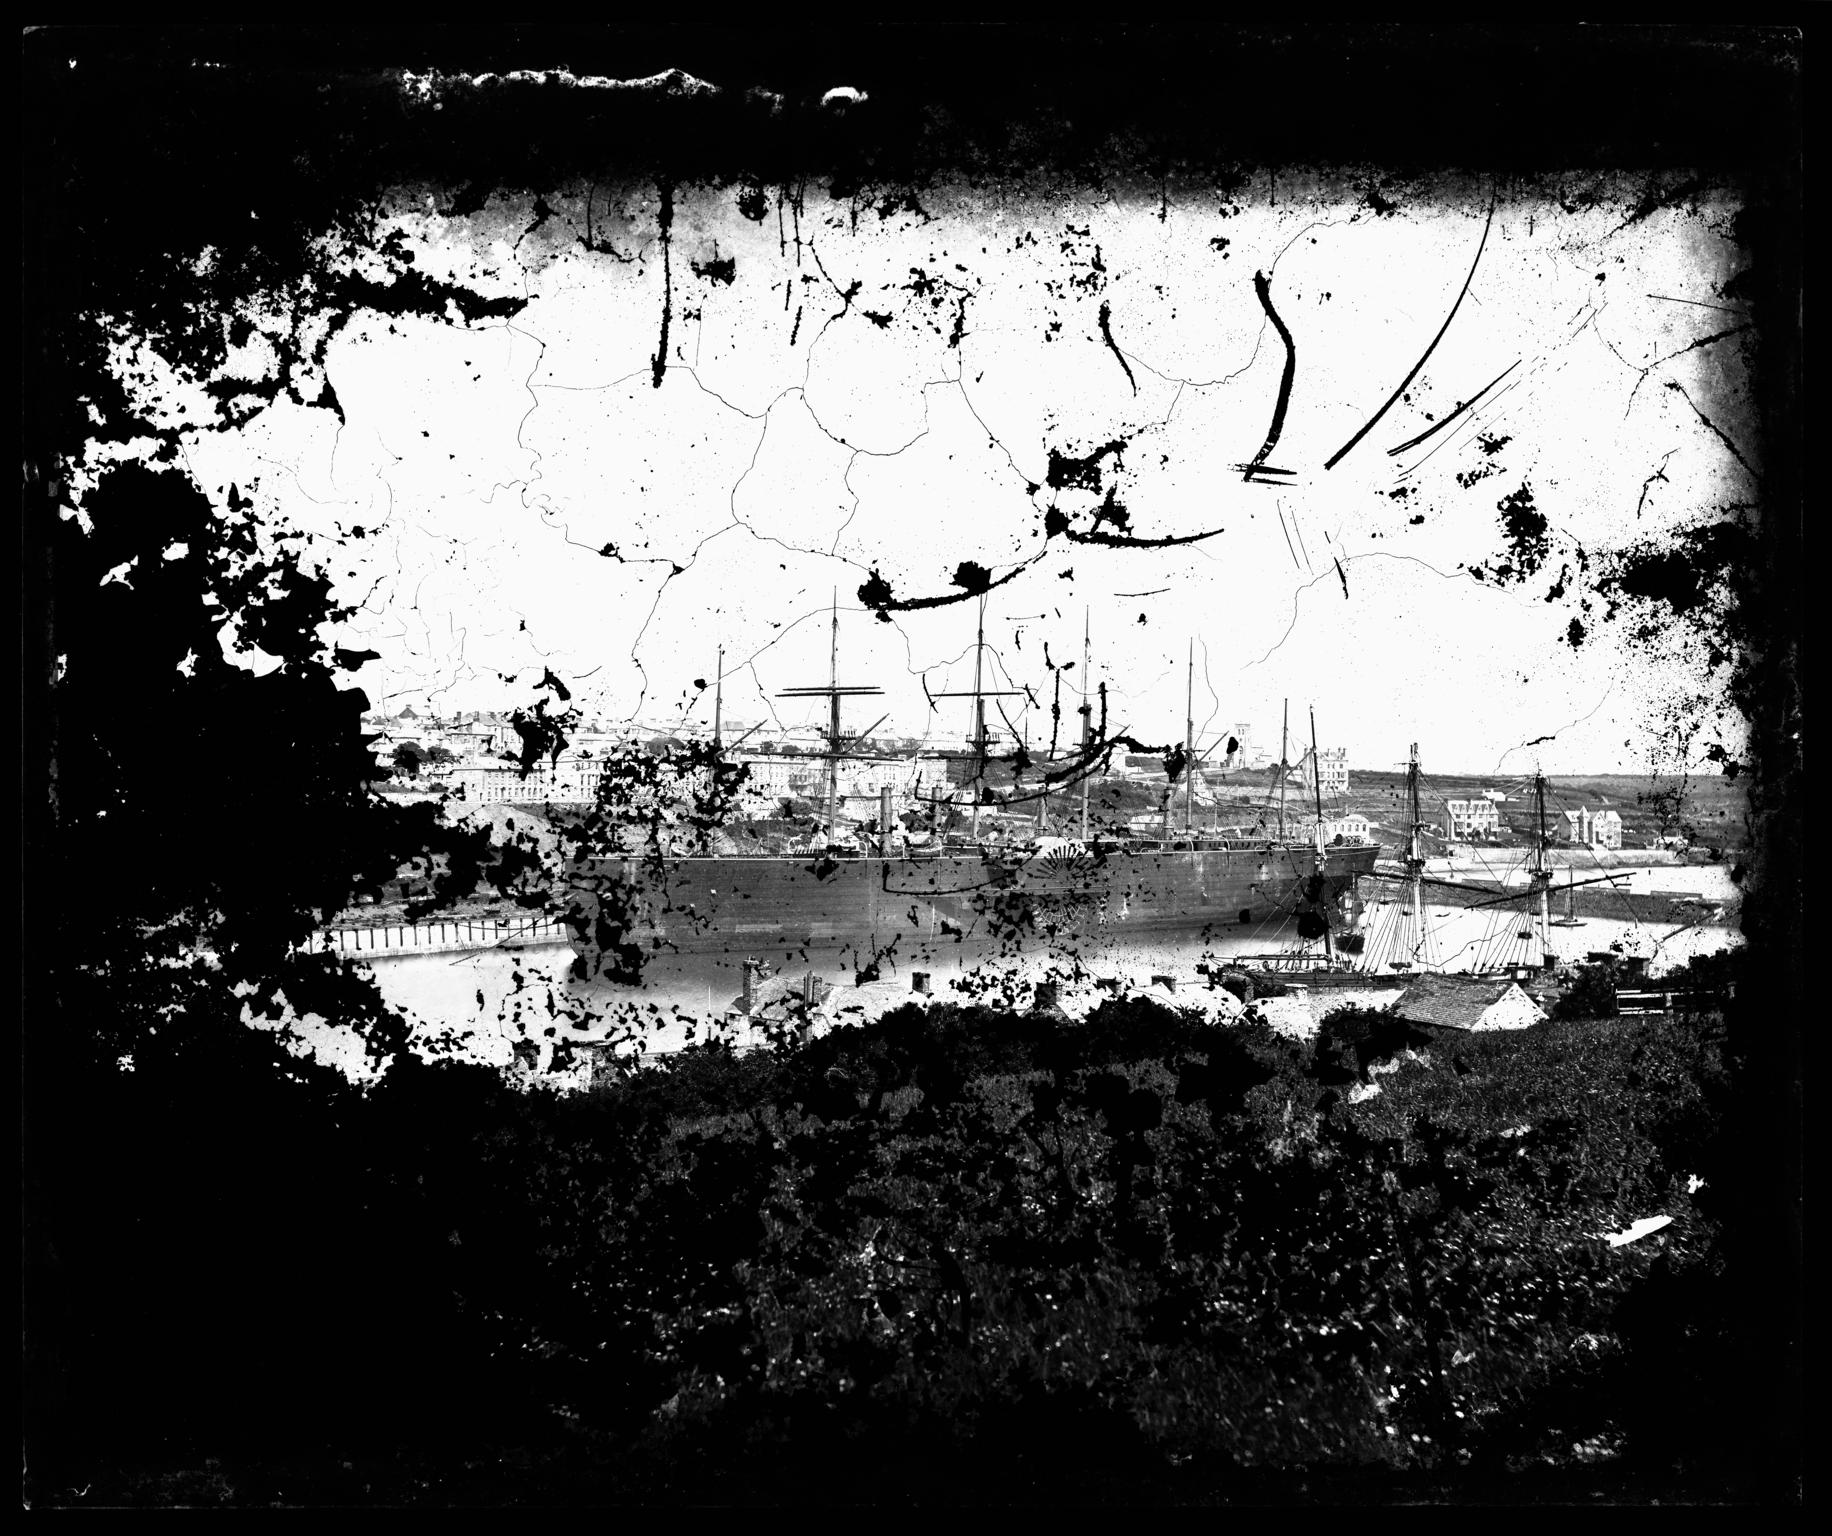 GREAT EASTERN at Milford Haven, glass negative